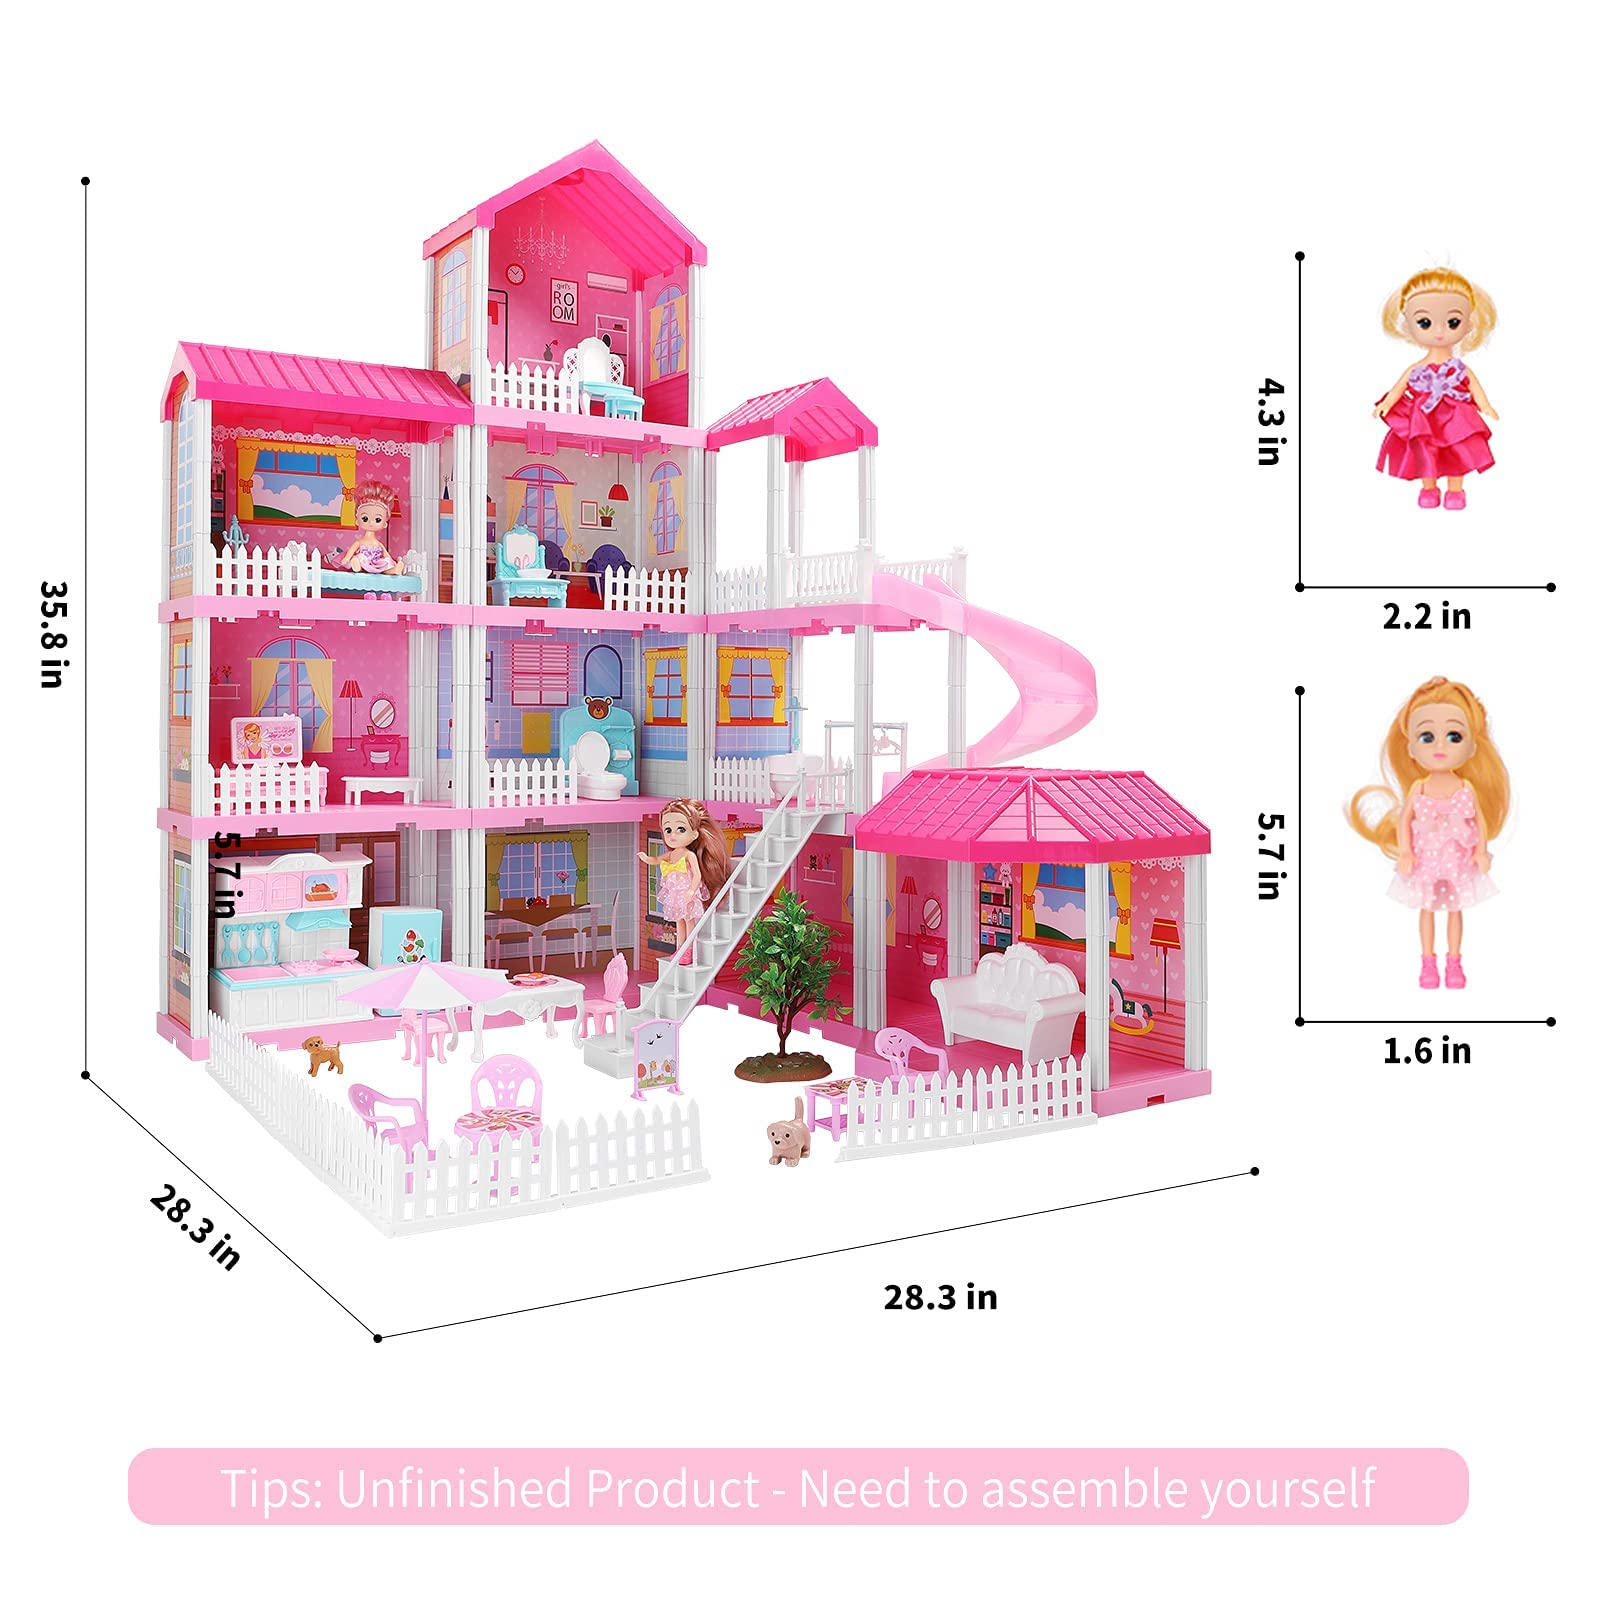 TEMI Doll House Dreamhouse Girl Toys - 4-Story 11 Doll House Rooms with Doll Toy Figures, Furniture and Accessories, Toddler Playhouse Christmas for 3 4 5 6 7 Year Old Girls